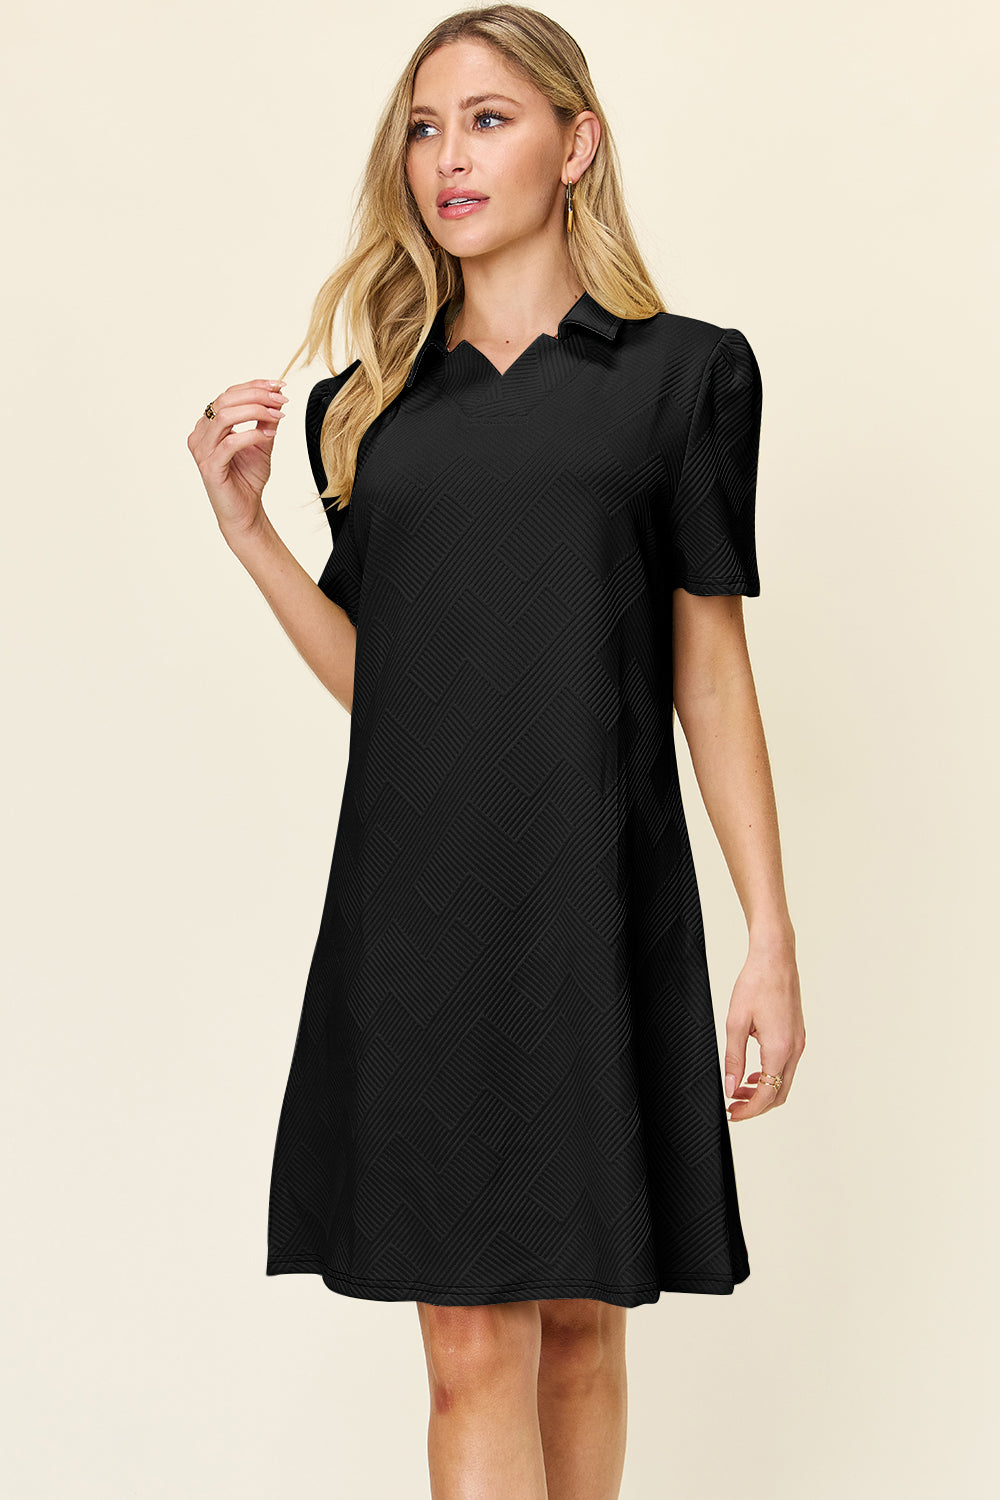 Double Take Full Size Texture Collared Neck Short Sleeve Dress Black 2XL